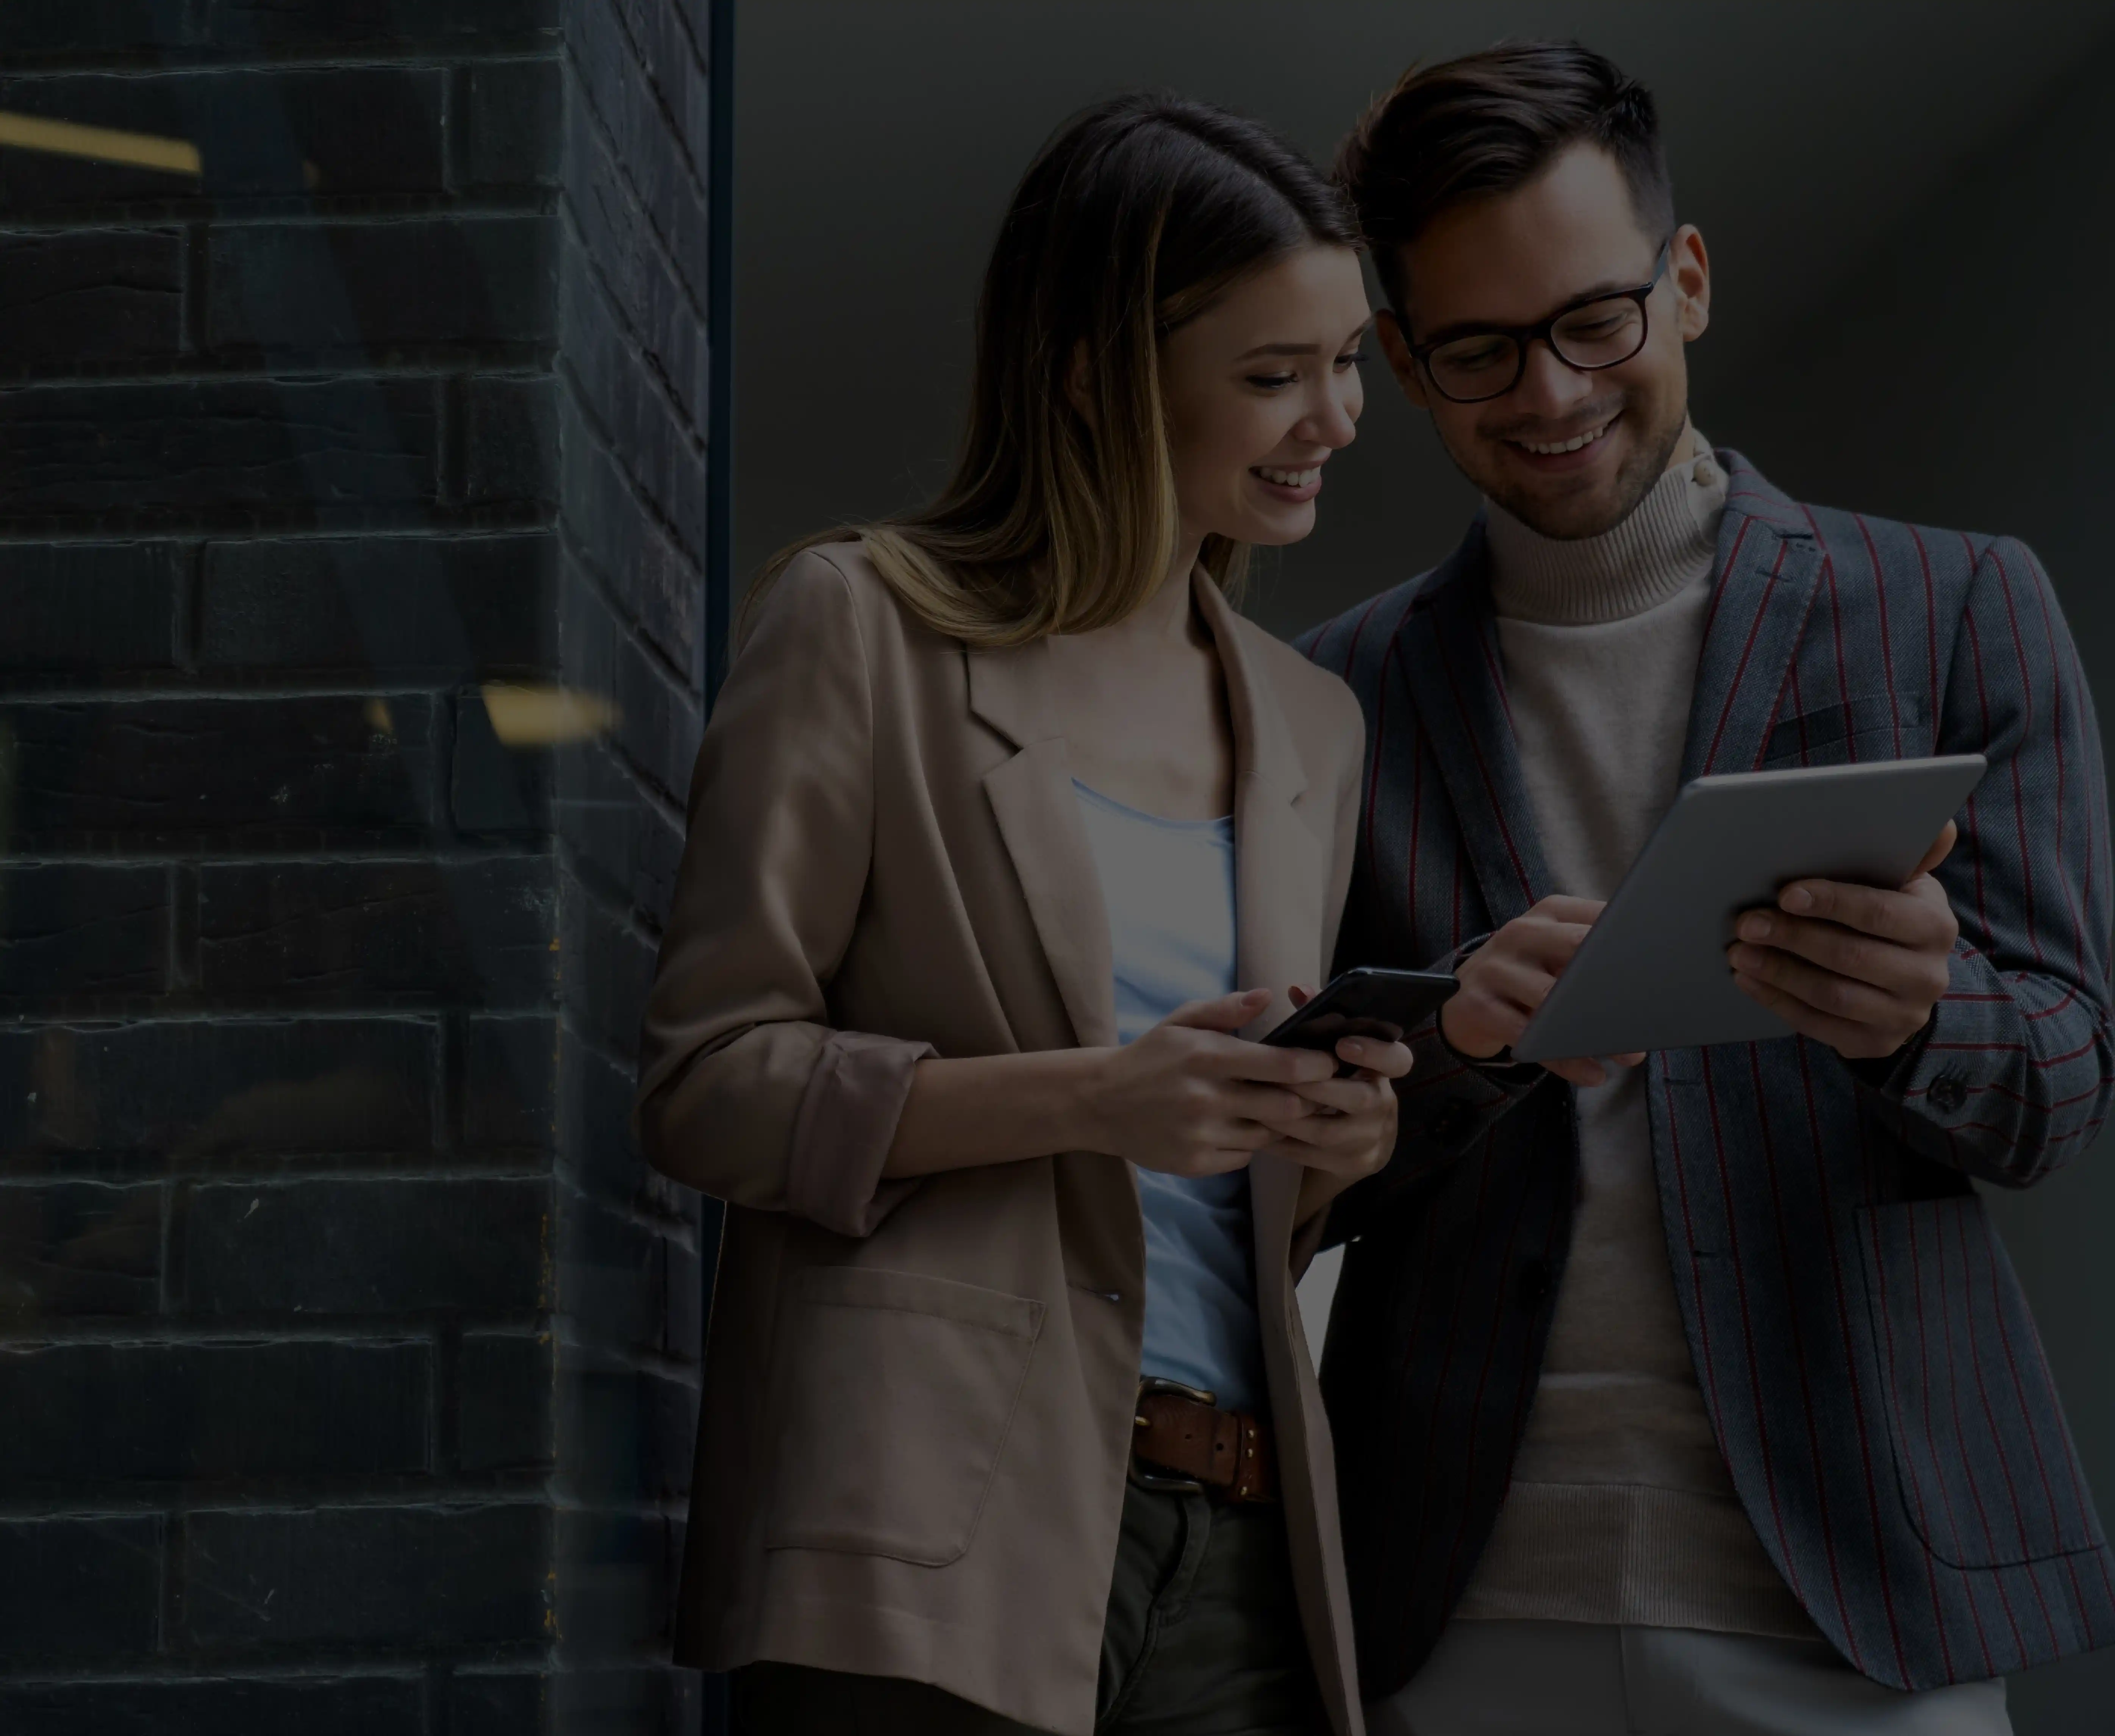 Positive Collaboration: In this heartwarming image, two individuals joyfully hold up their phones, wearing bright smiles that radiate their happiness to work with our esteemed global web technology agency.